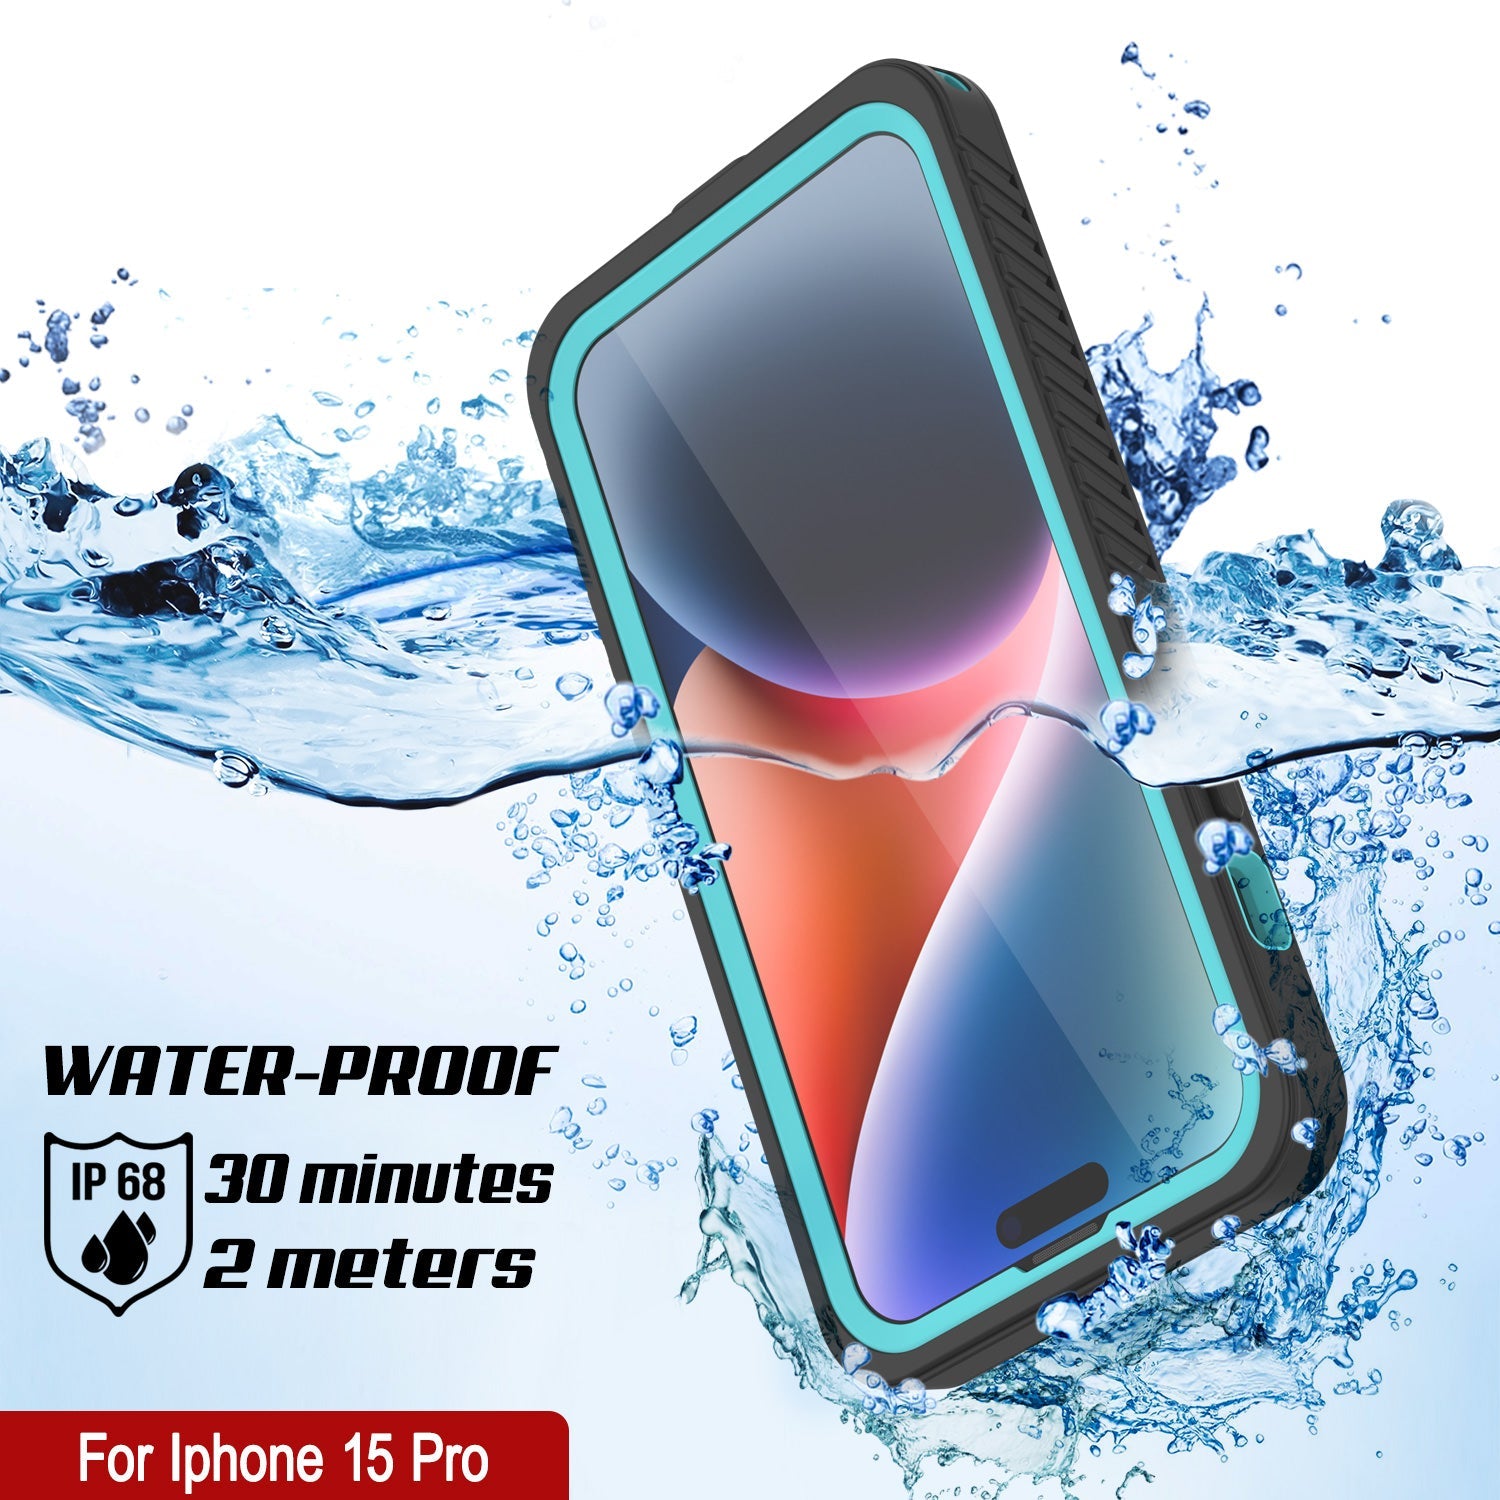 iPhone 15 Pro Waterproof Case, Punkcase [Extreme Series] Armor Cover W/ Built In Screen Protector [Teal]